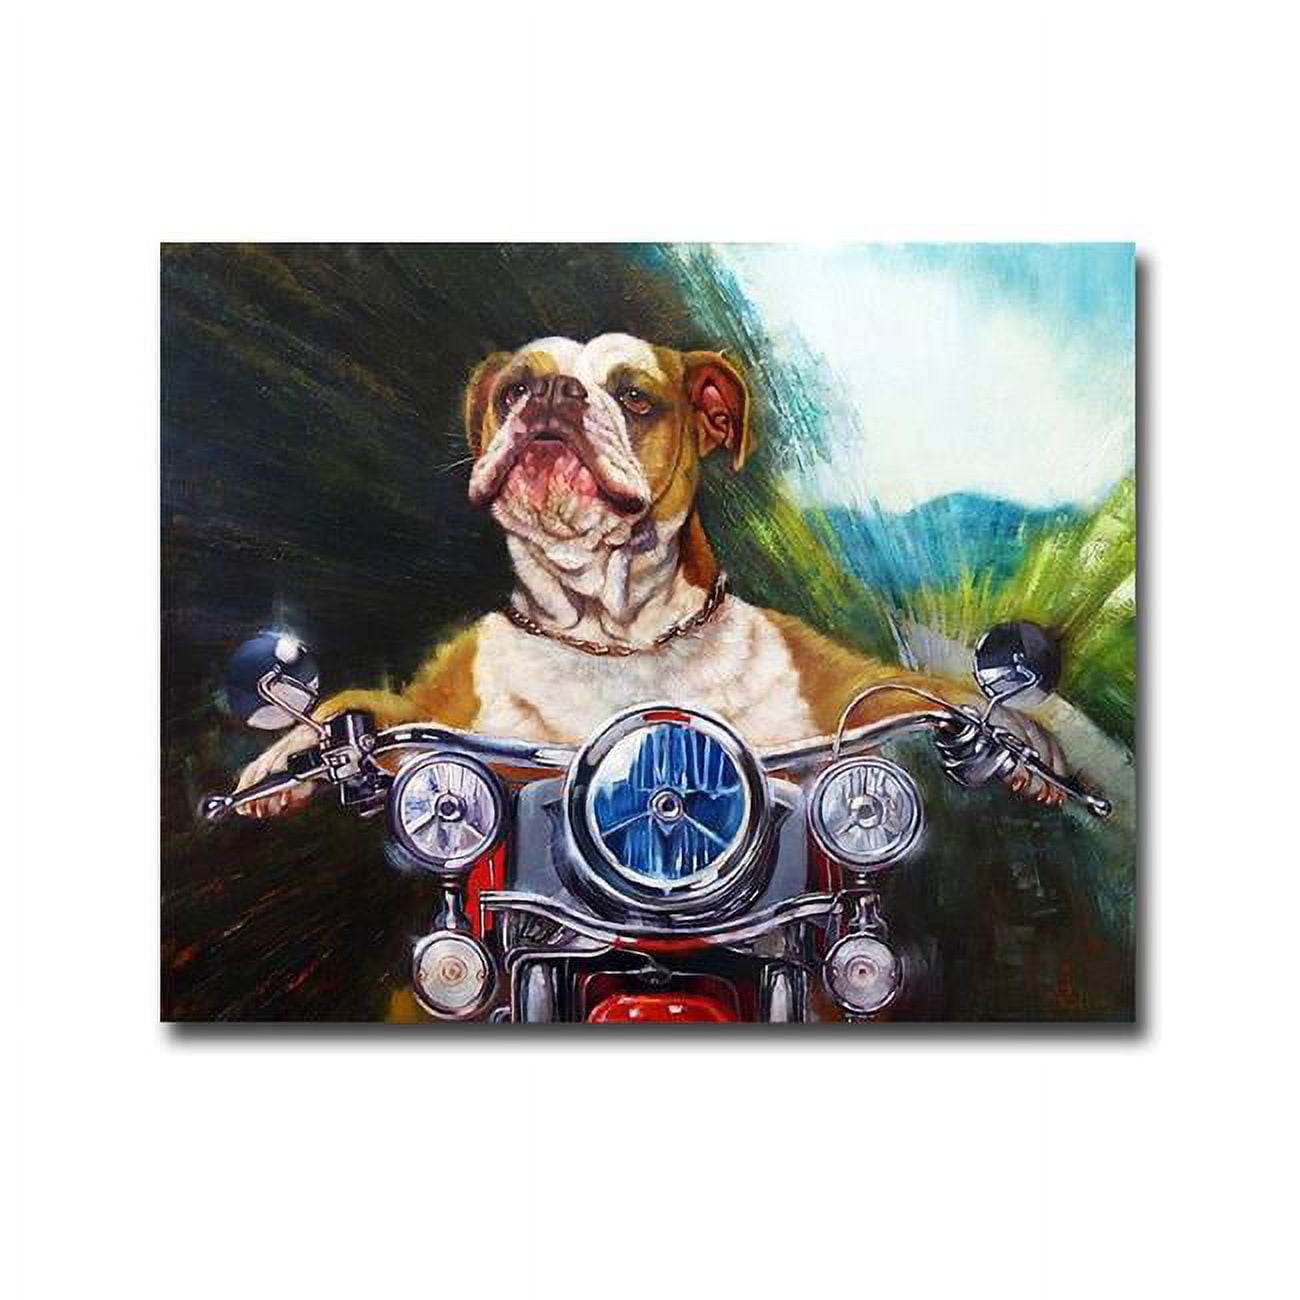 1620546ig Born To Be Wild By Lucia Heffernan Premium Gallery-wrapped Canvas Giclee Art - Ready-to-hang, 16 X 20 In.